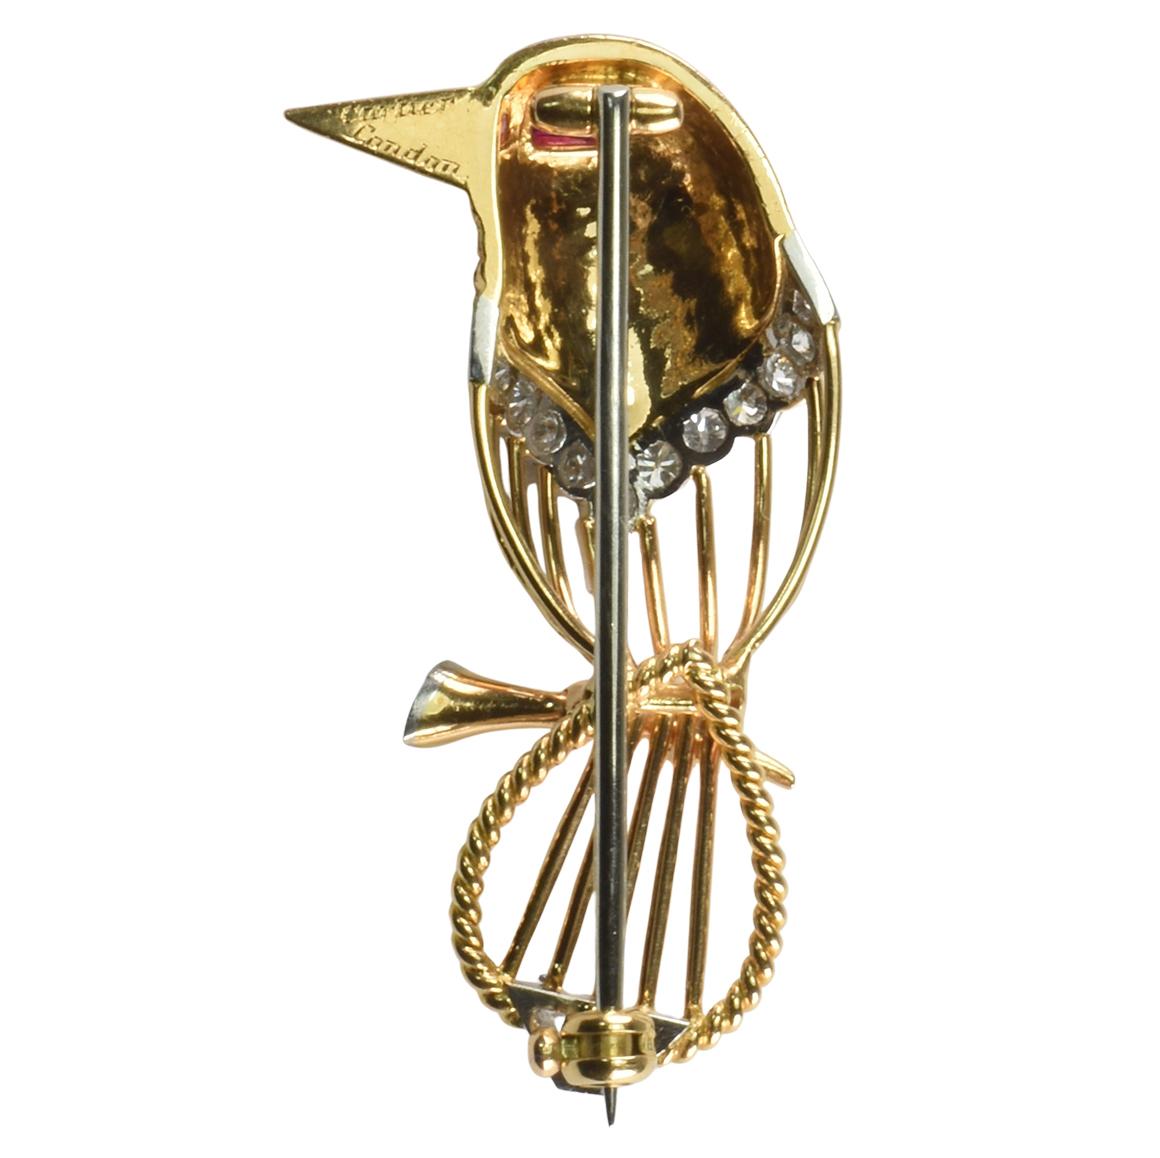 An adorable superbly modelled bird brooch by renowned  jewellery house Cartier. Crafted from 18ct Gold with rope twist and textured detailing and platinum settings. Set with a step cut ruby eye. Brilliant cut diamonds and a trapezoid cut diamond.